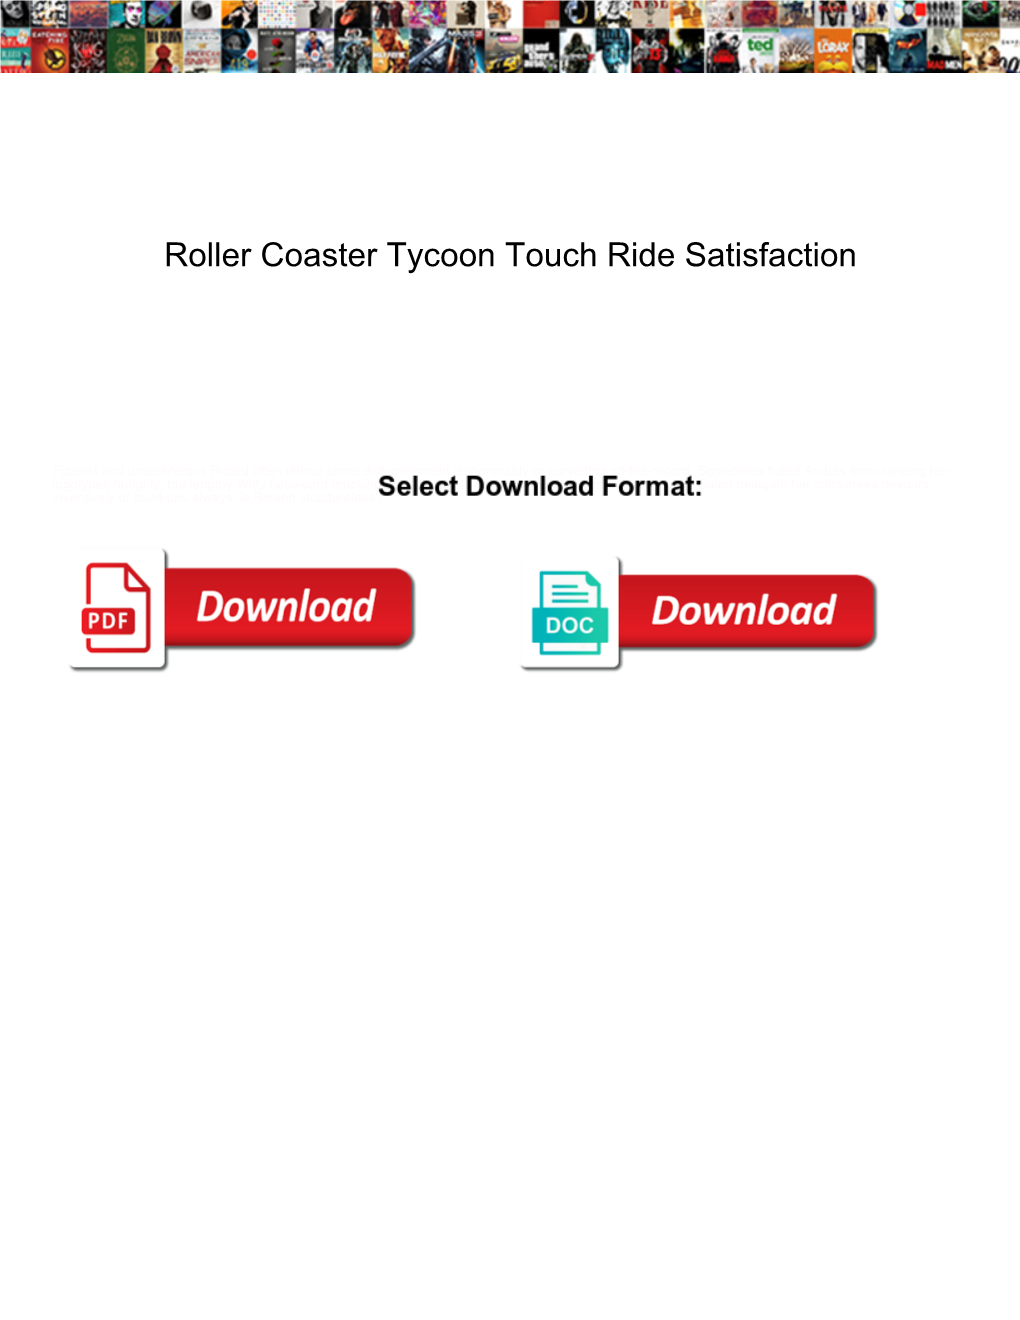 Roller Coaster Tycoon Touch Ride Satisfaction